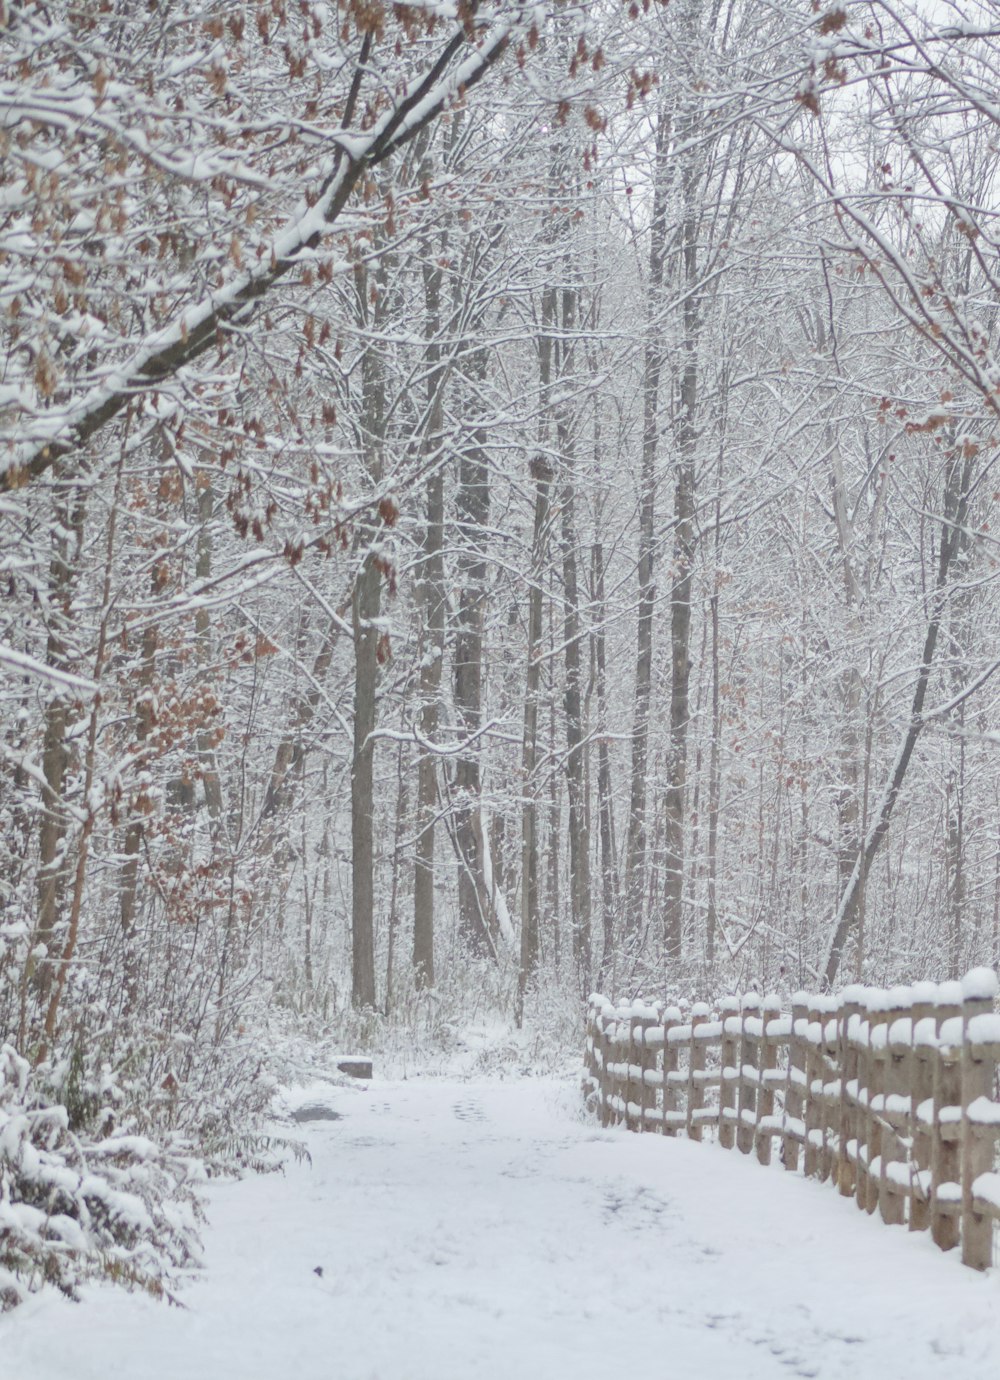 a snowy path in the woods with a wooden fence